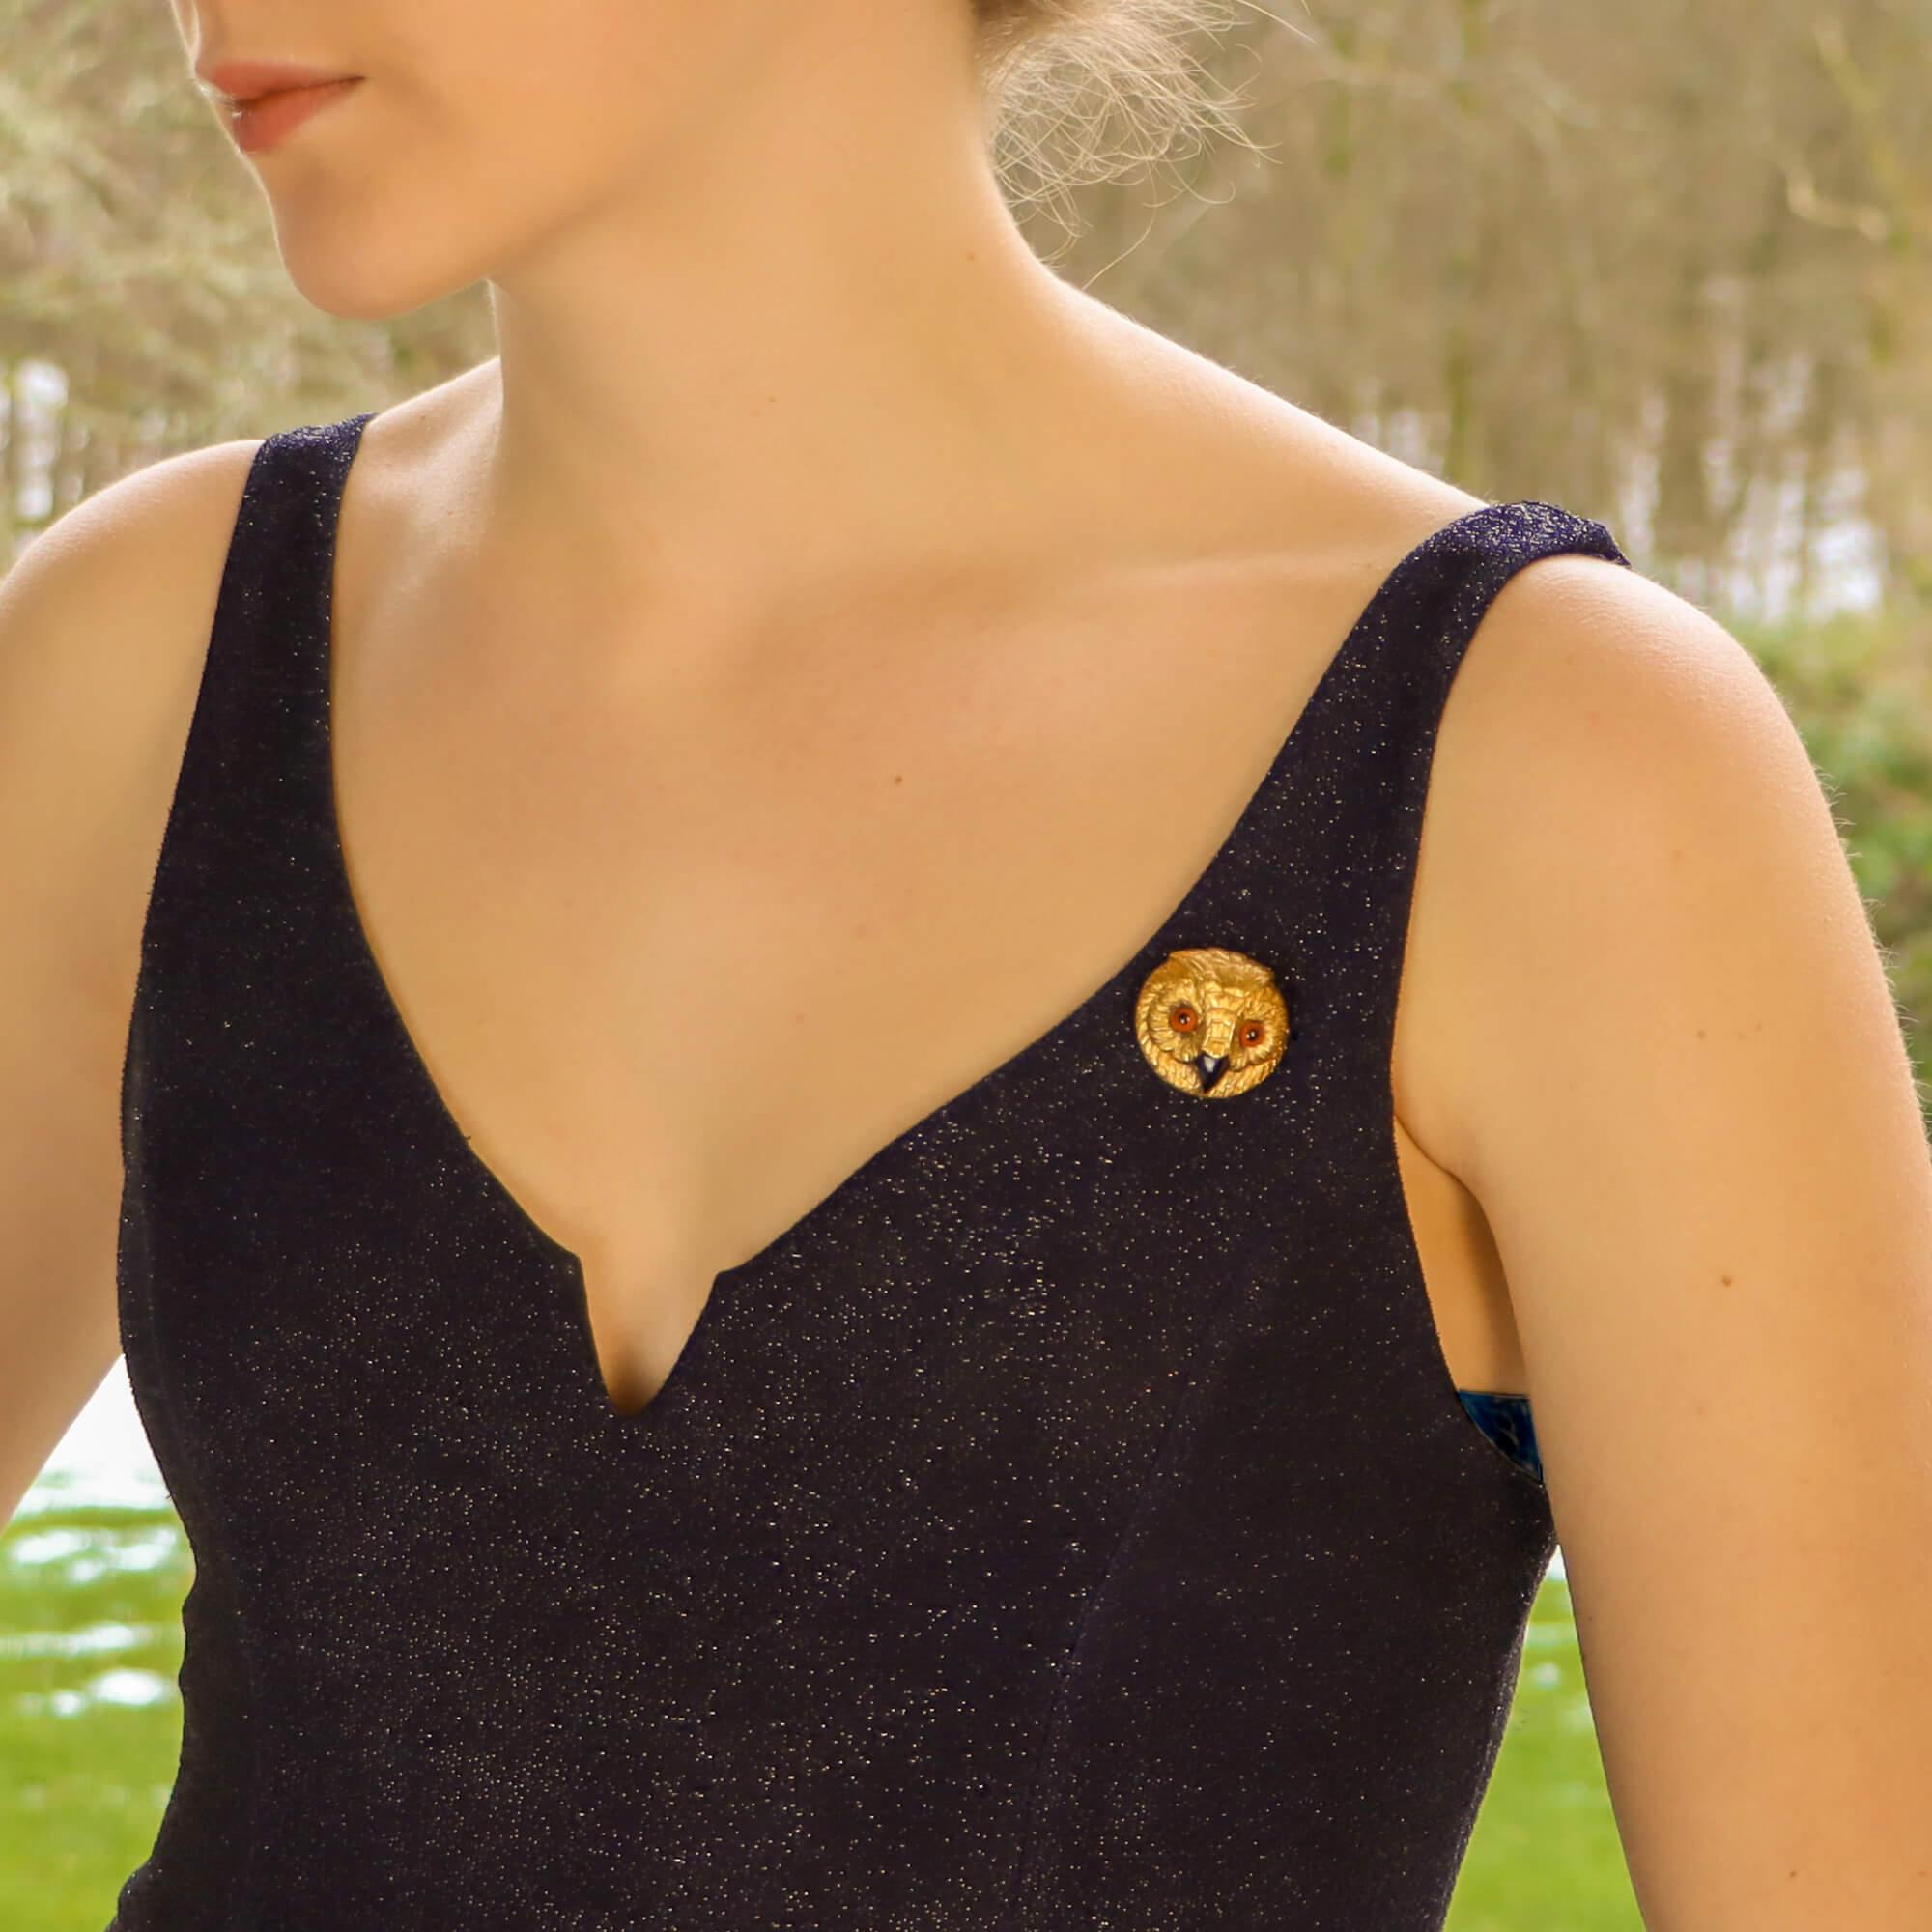 A beautifully hand crafted Victorian owl's head brooch set in 9k yellow gold. 

The brooch features fine feathered detailing, particularly around the eyes which are small glass beads and a striking black onyx beak. The piece is secured to the